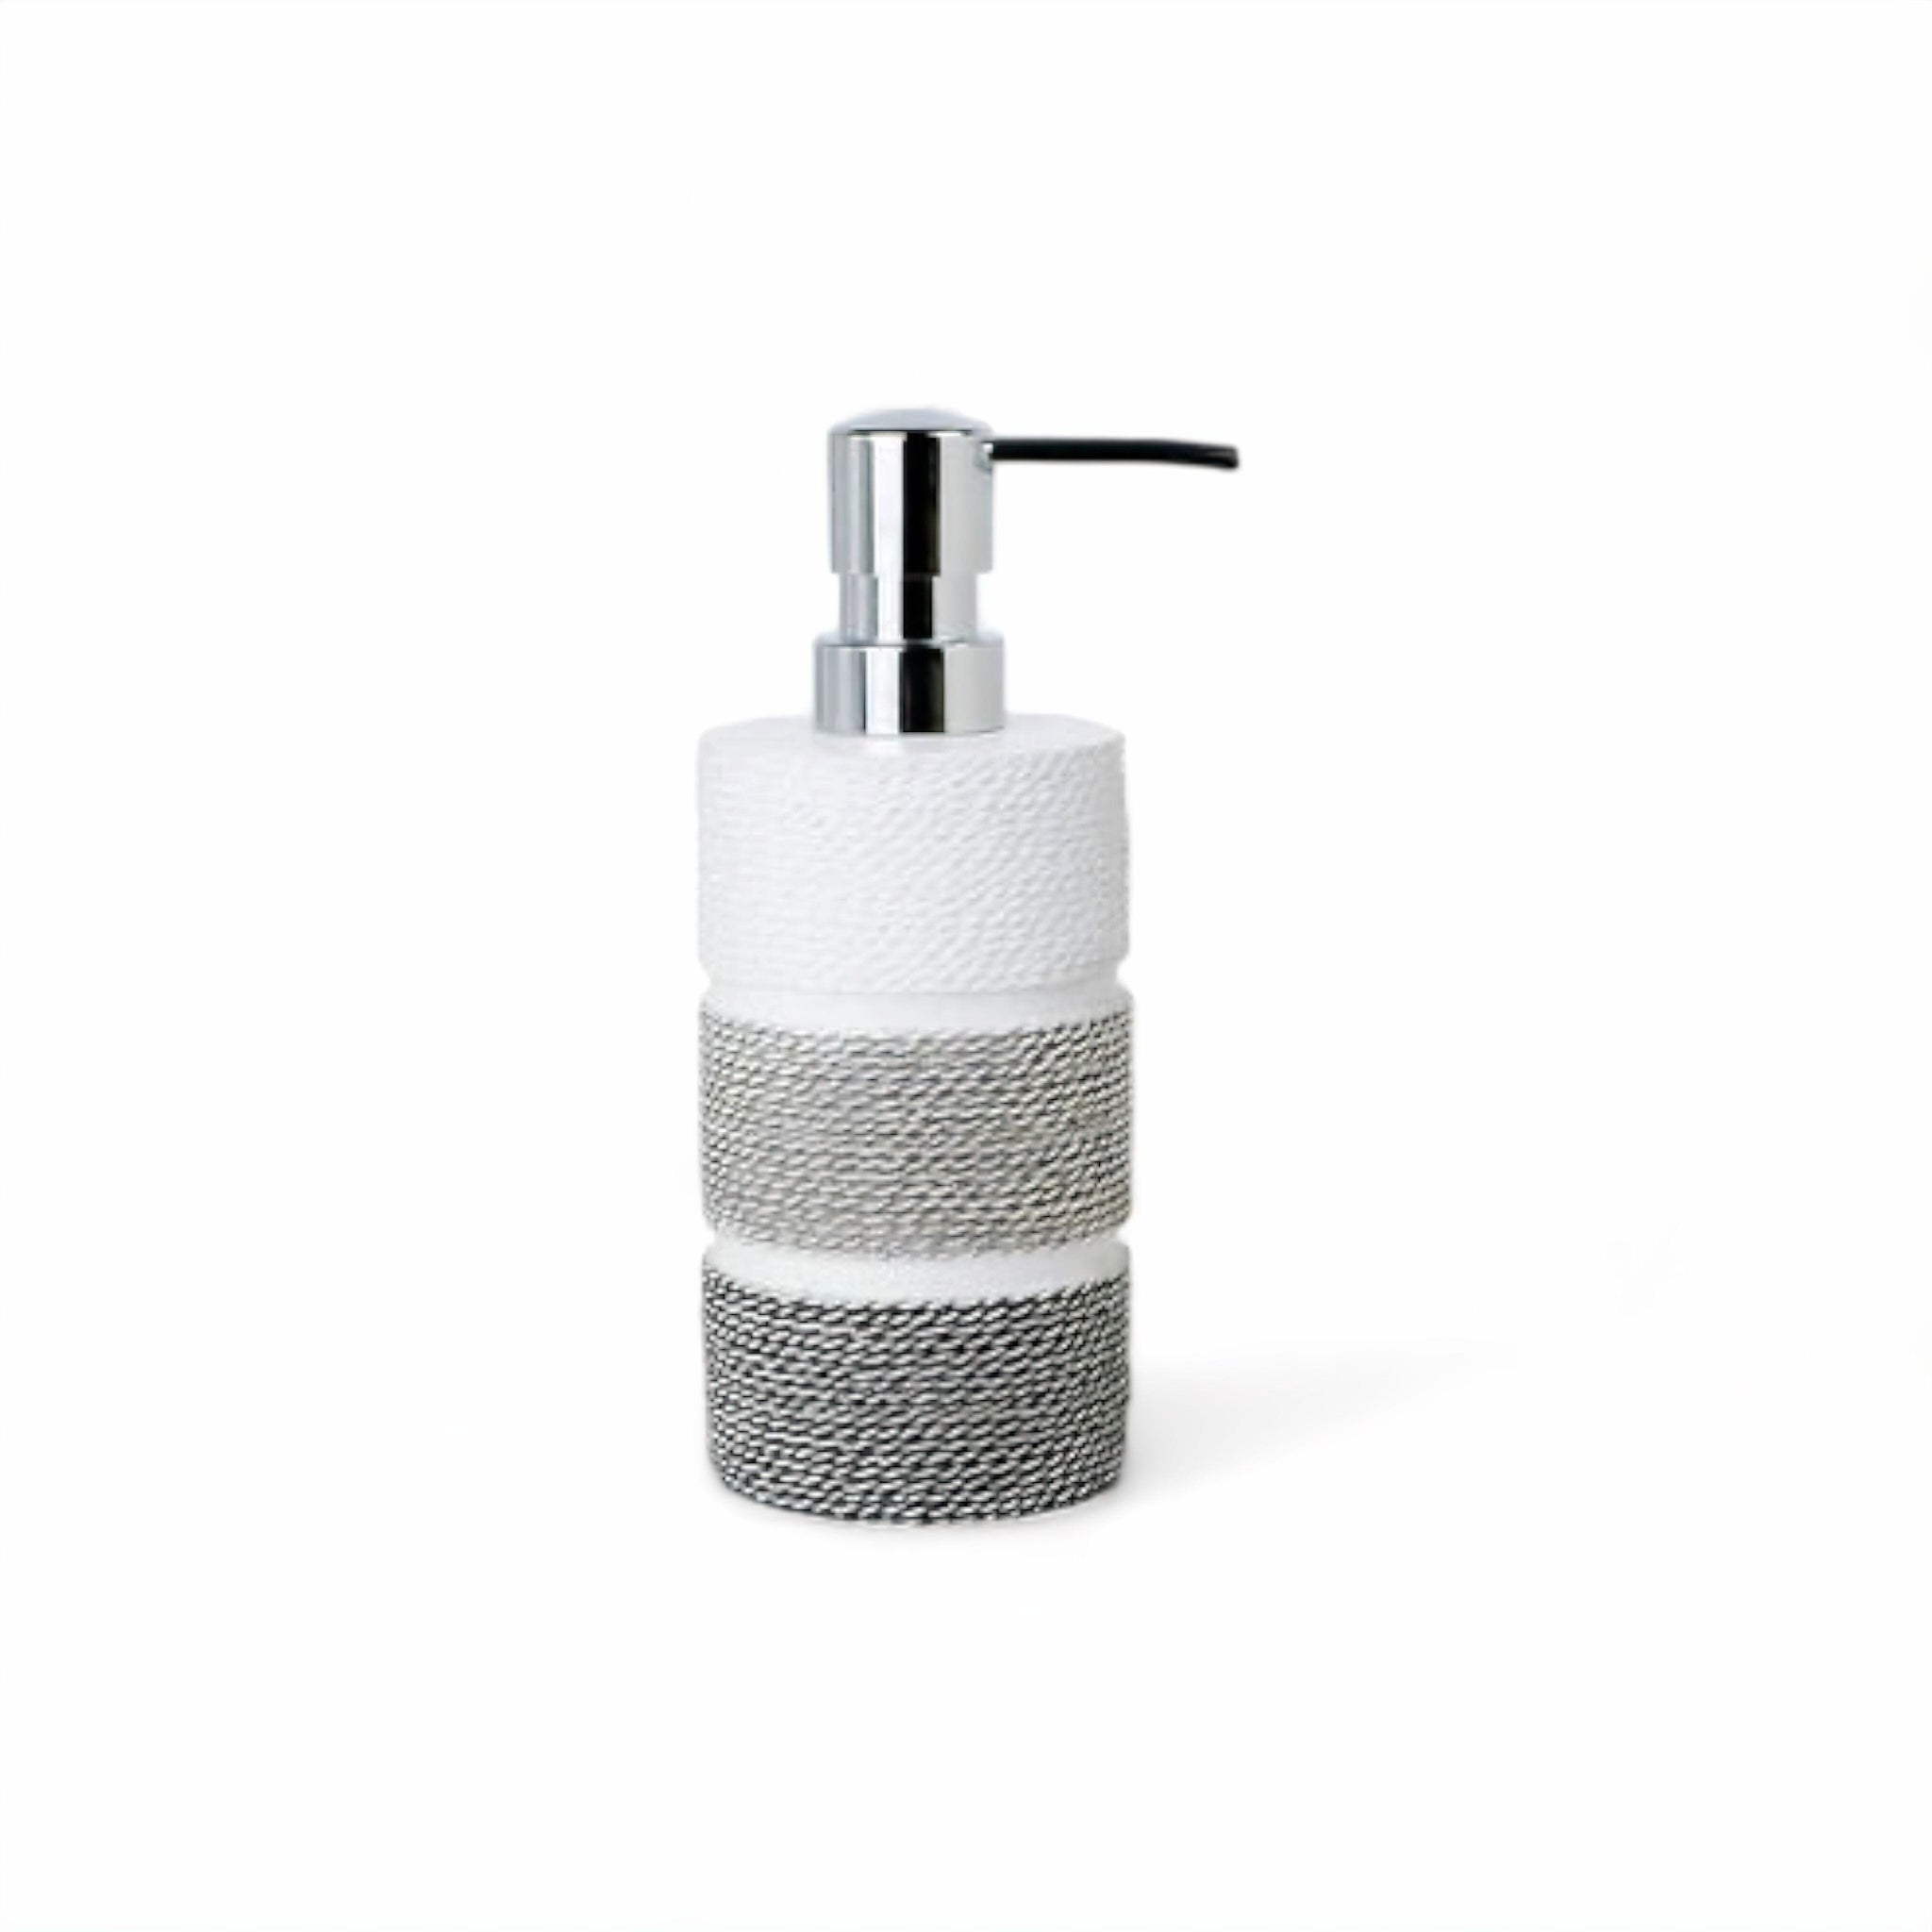 Tranquil Bathroom Accessories Collection Soap Dispenser 